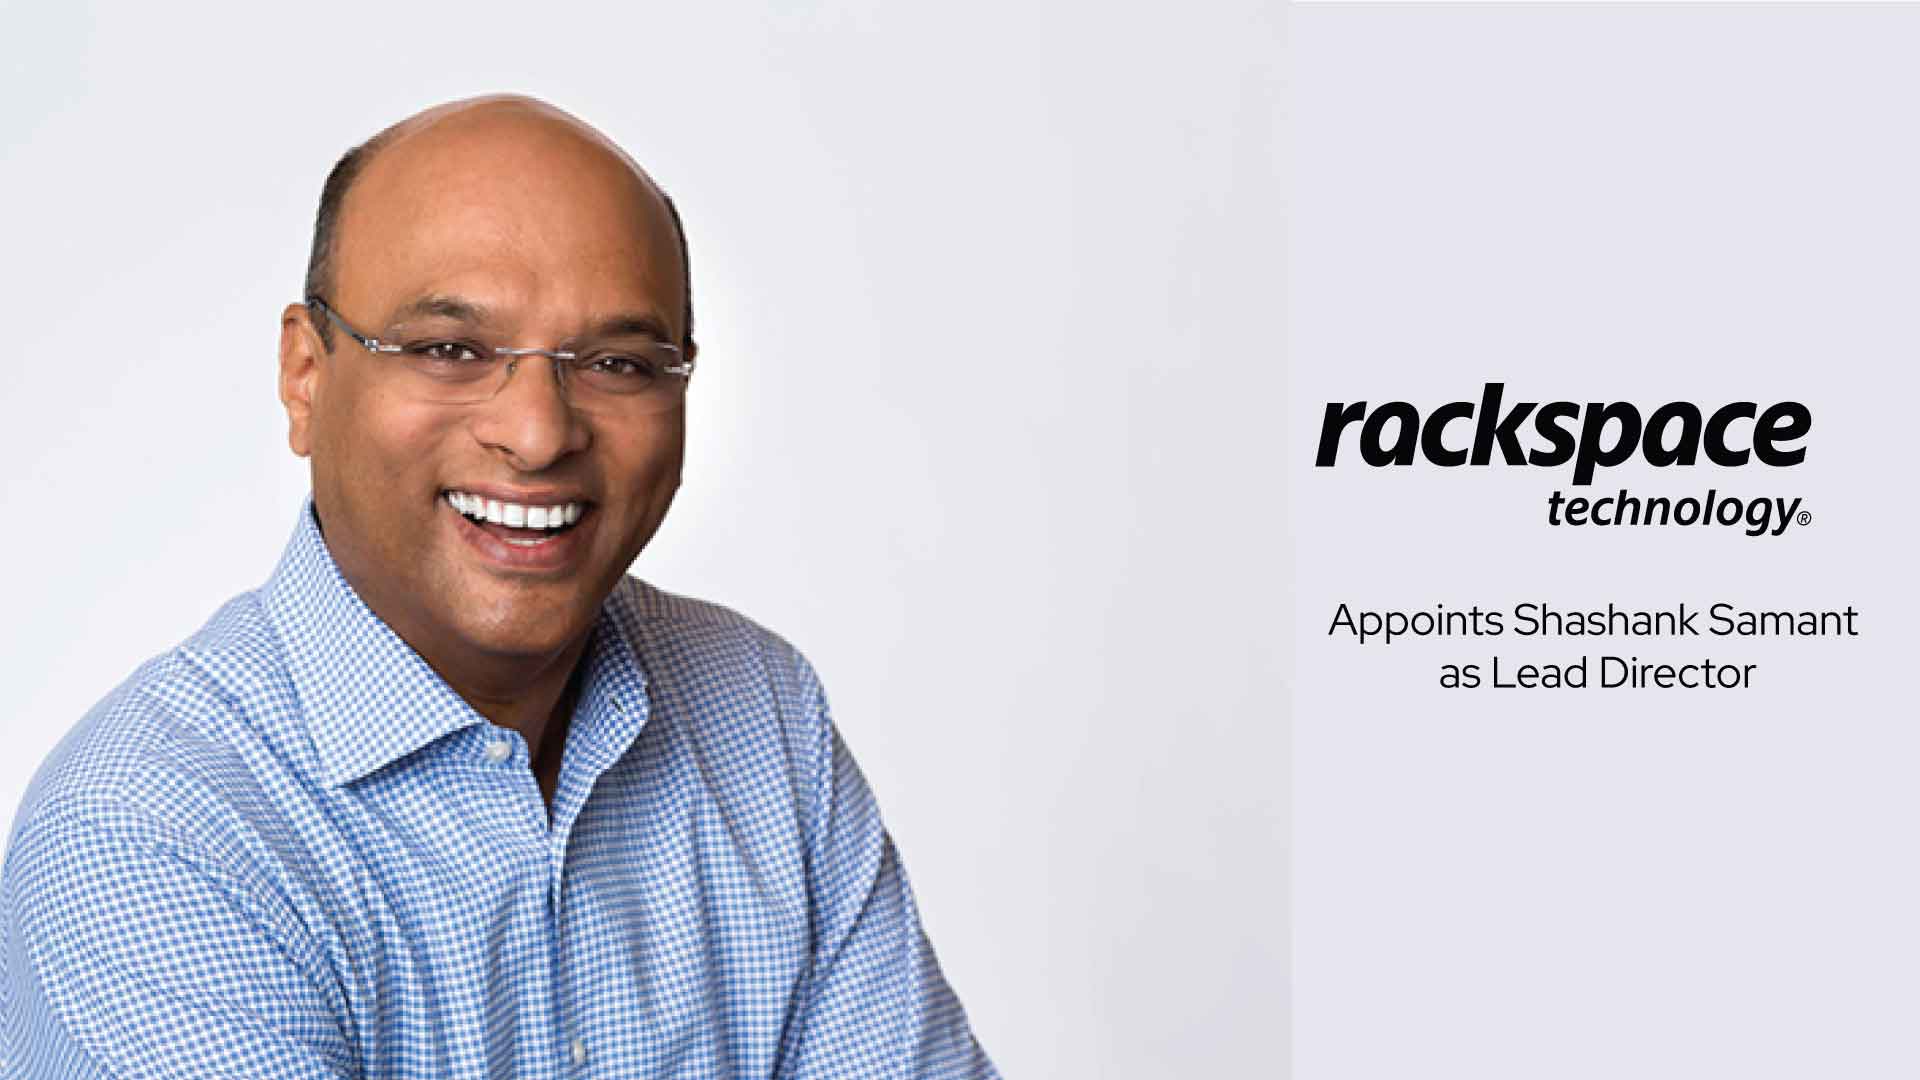 Shashank Samant Appointed as the Lead Director of Rackspace Technology